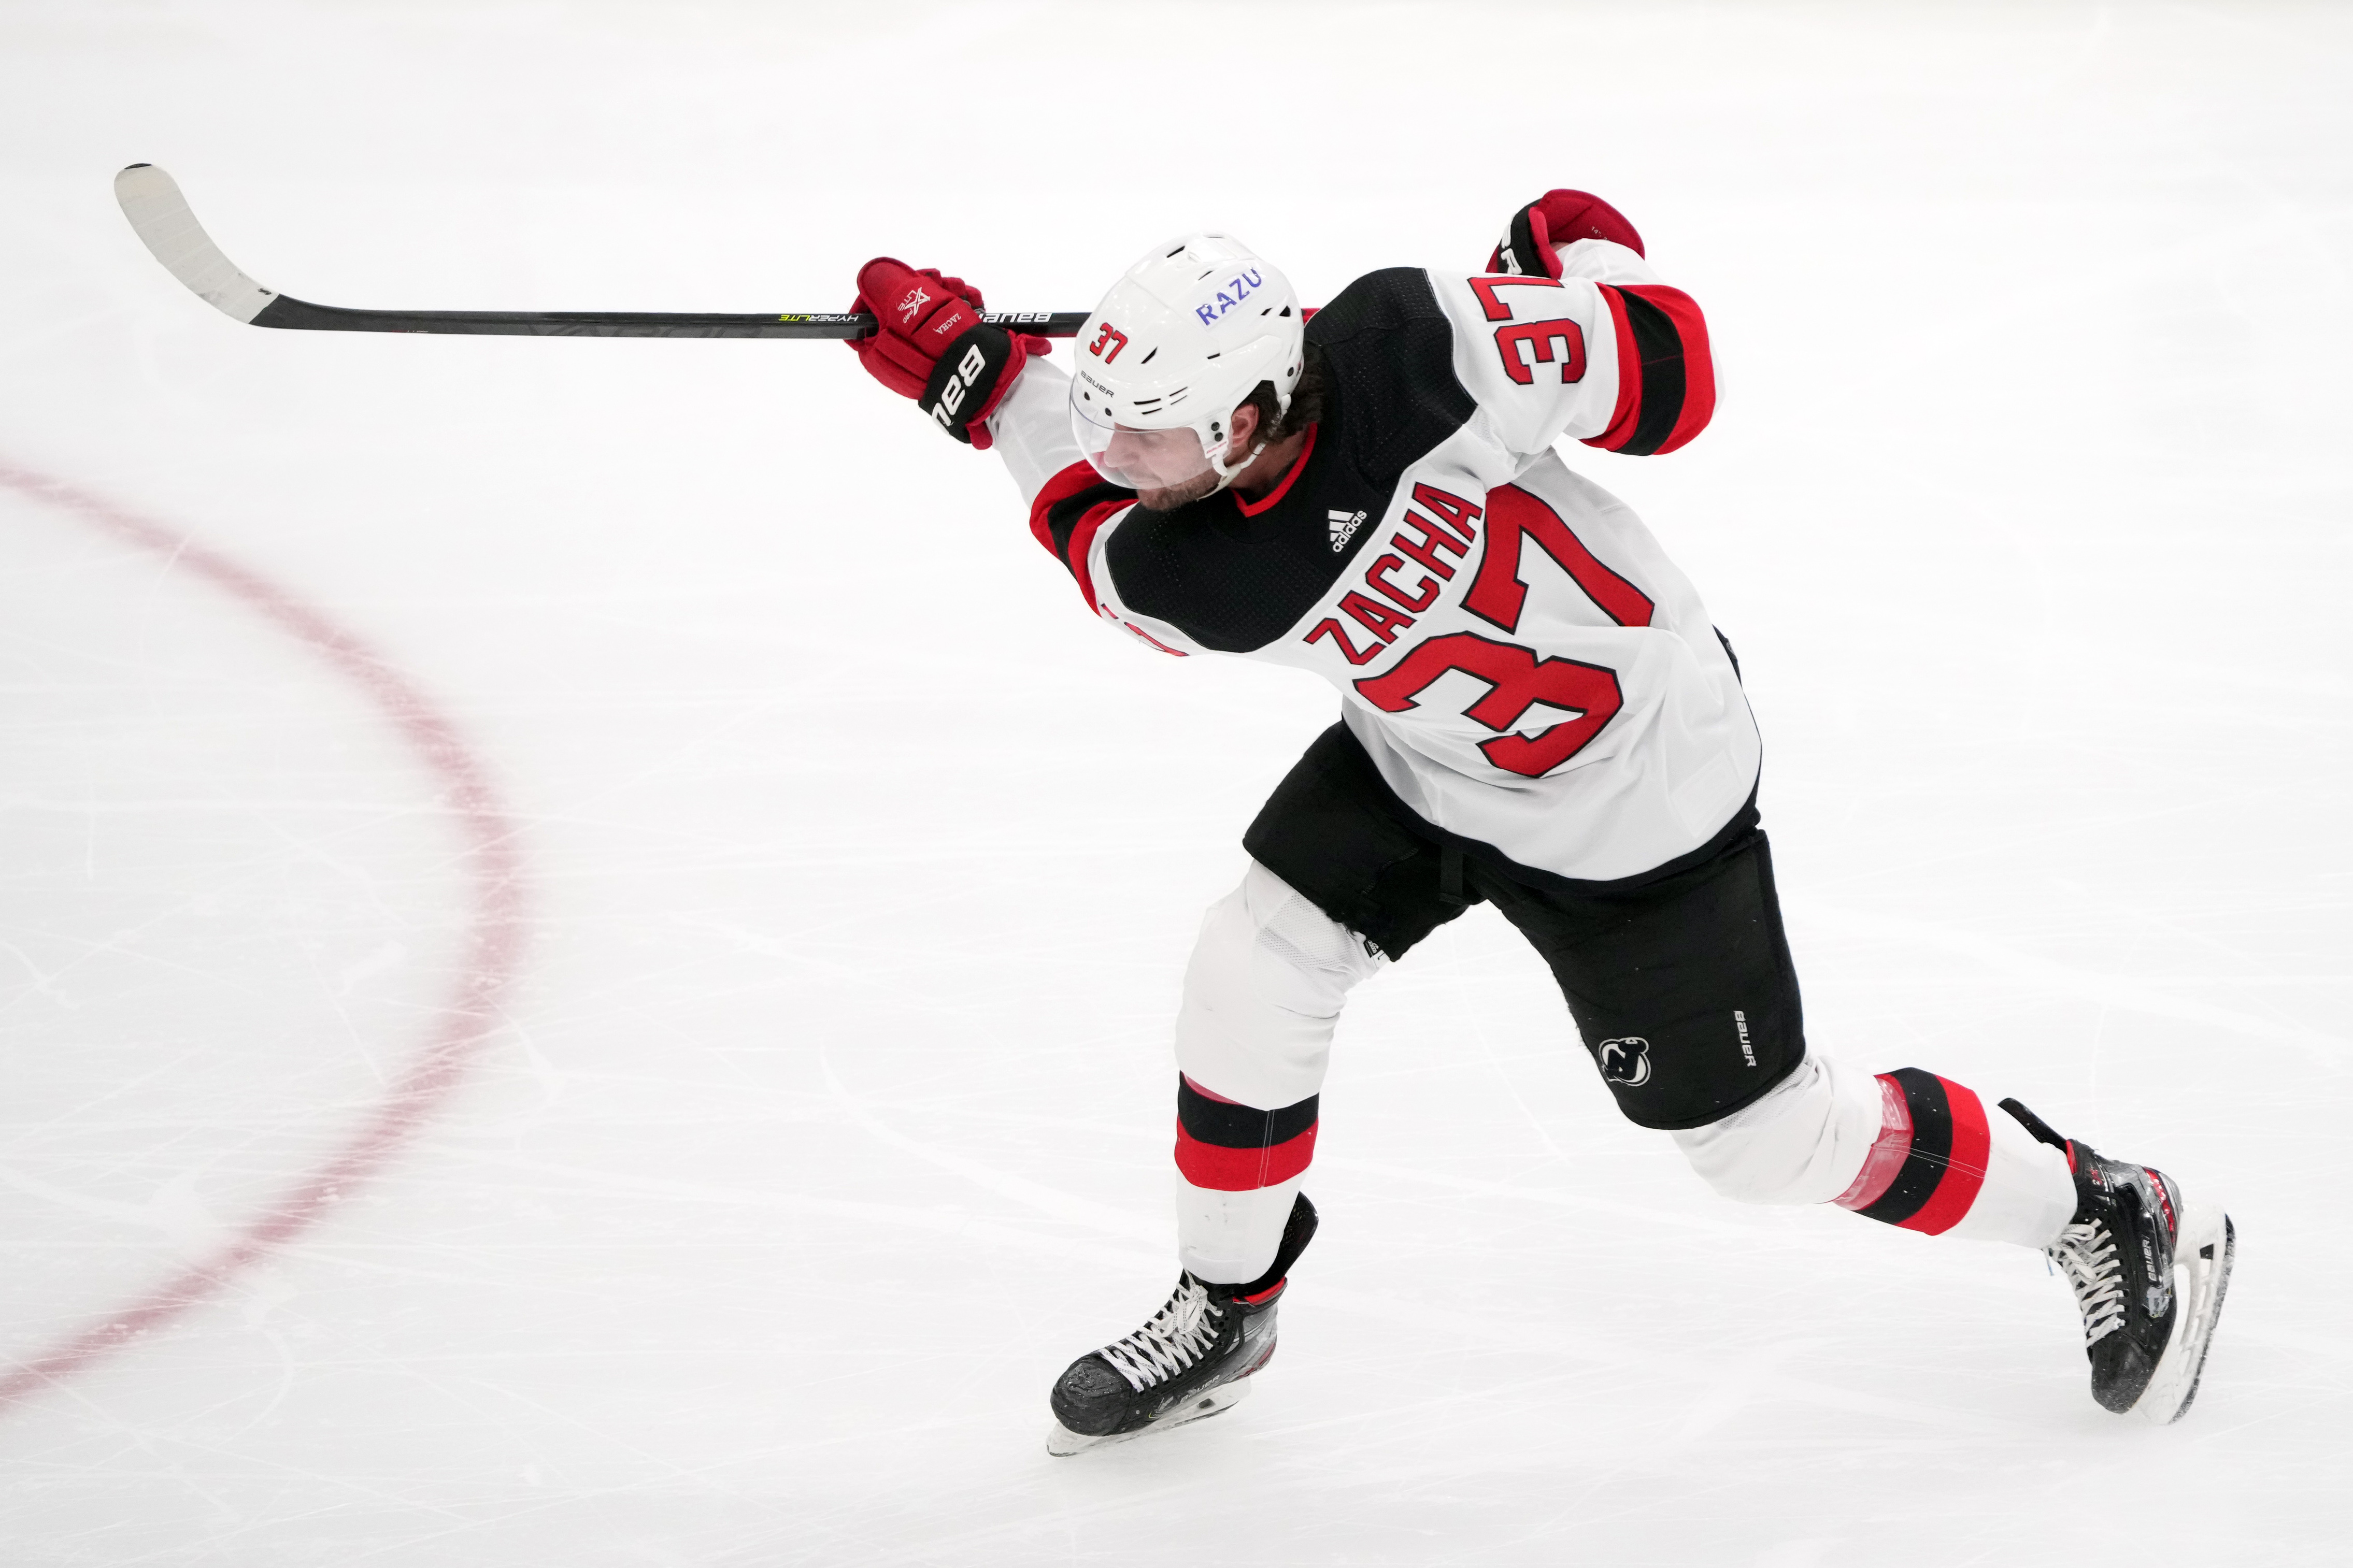 Bruins Acquire Zacha From Devils, Deal Haula To New Jersey